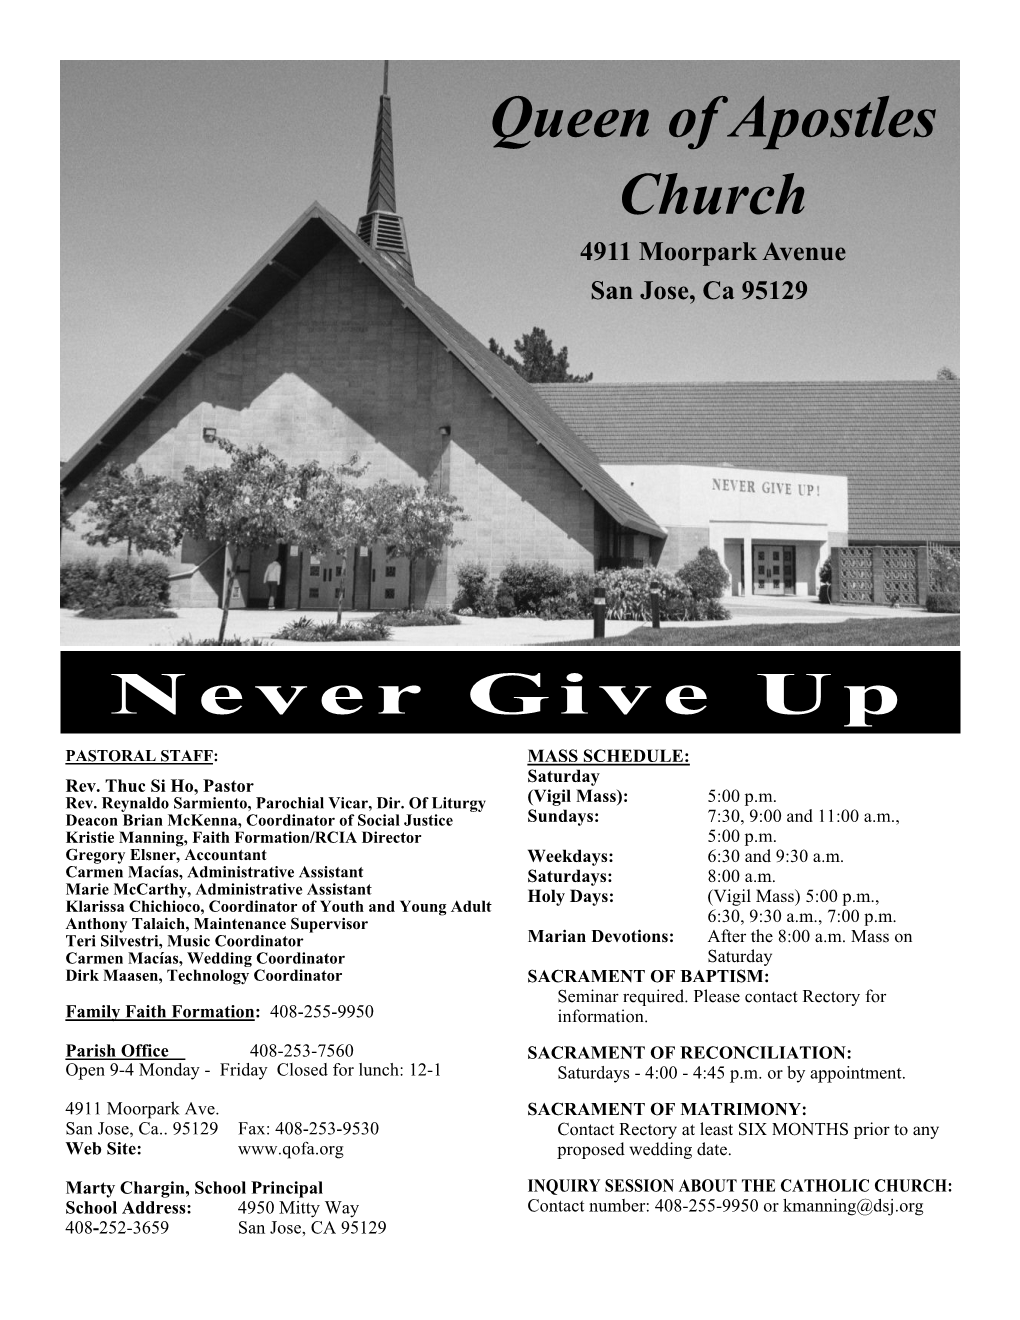 Never Give up Queen of Apostles Church